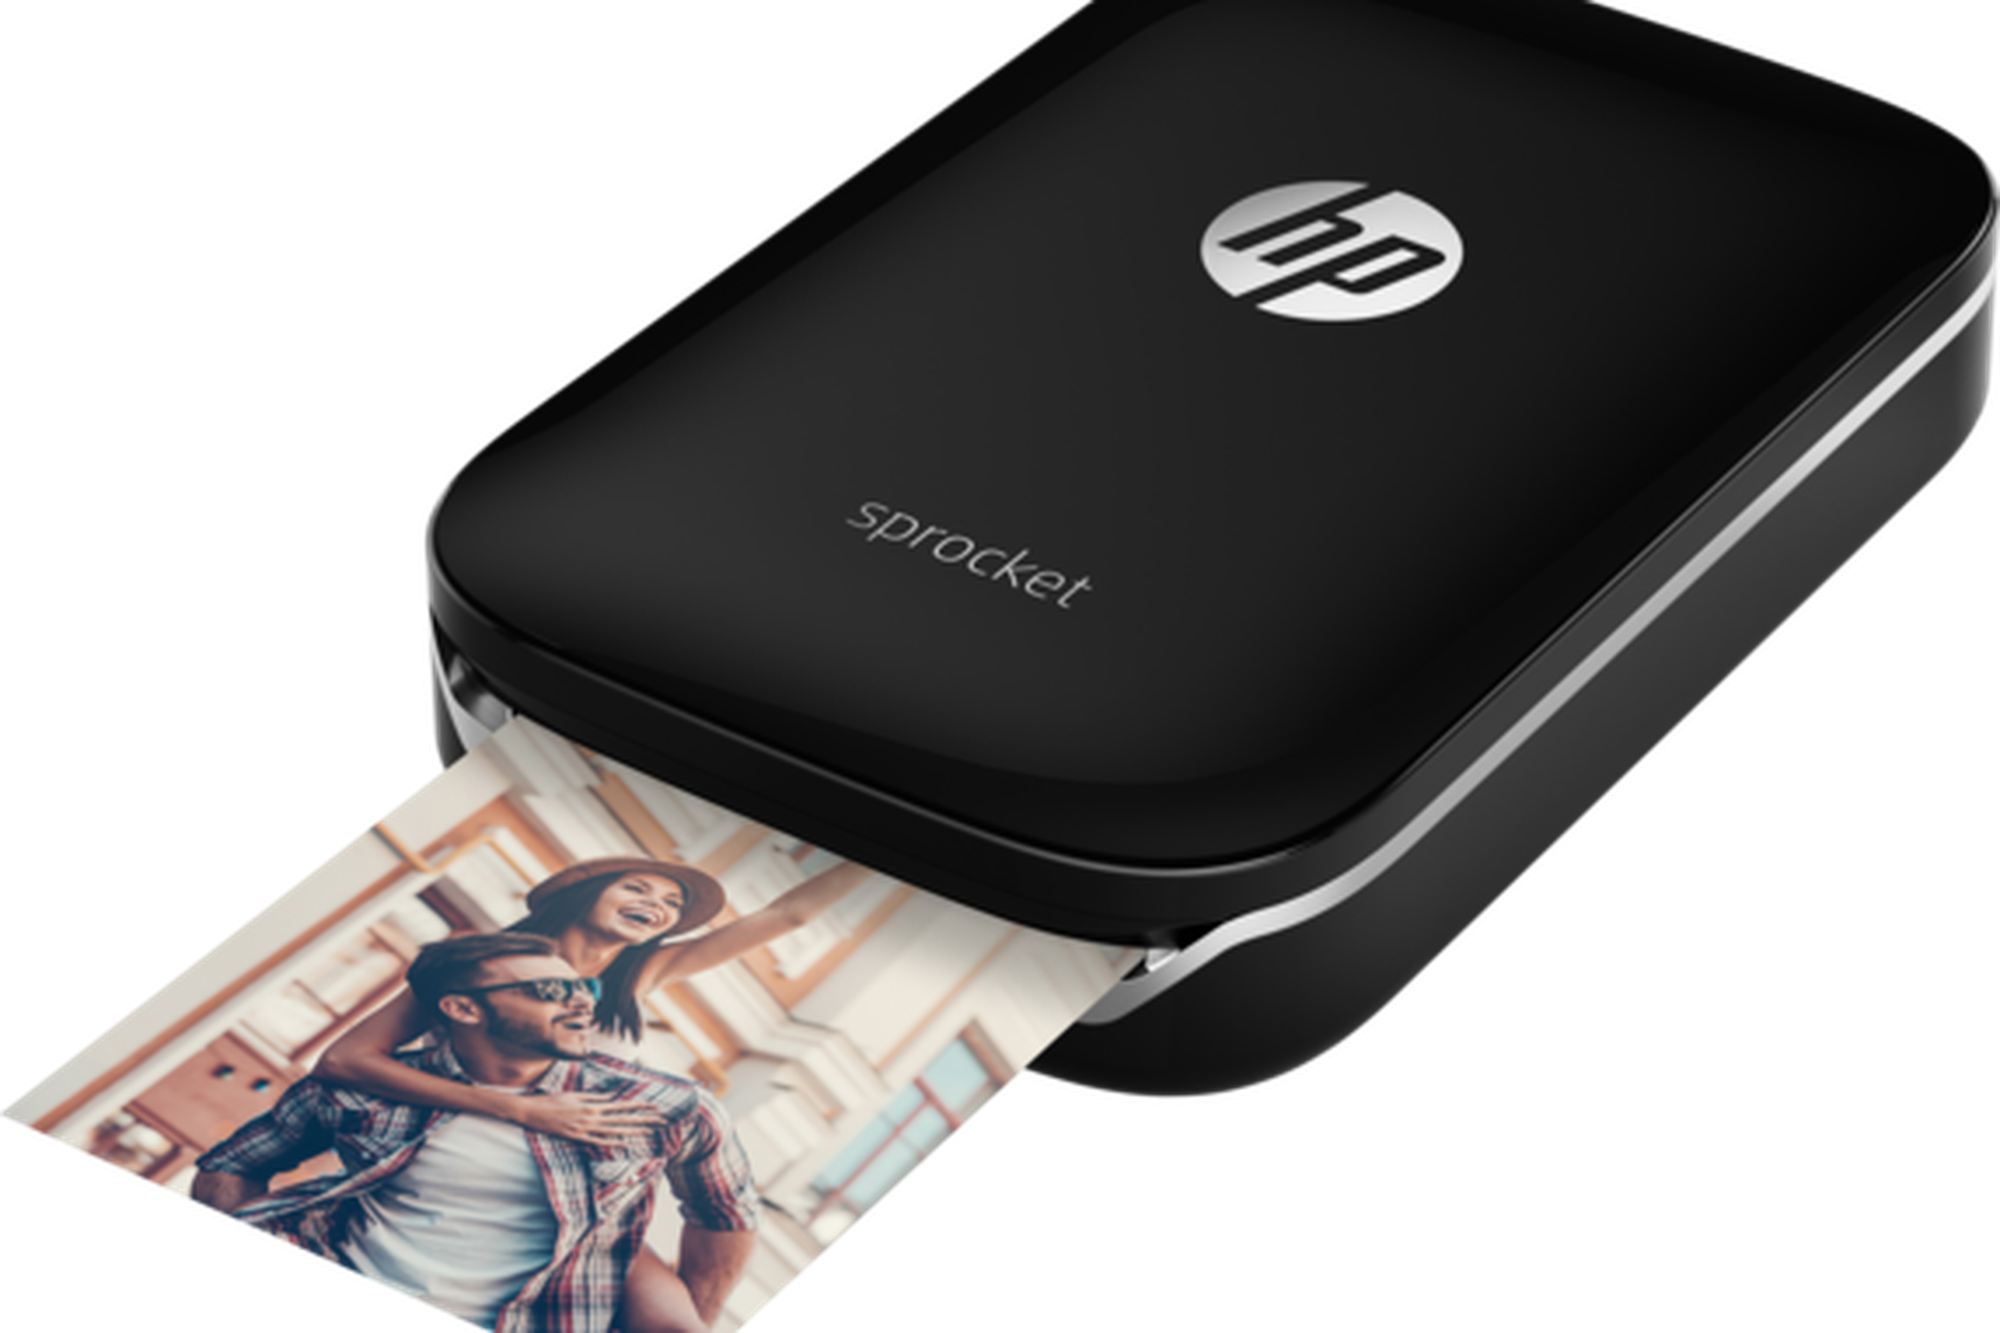 HP's Sprocket might not be the best instant printer, but definitely the most fun - The Verge